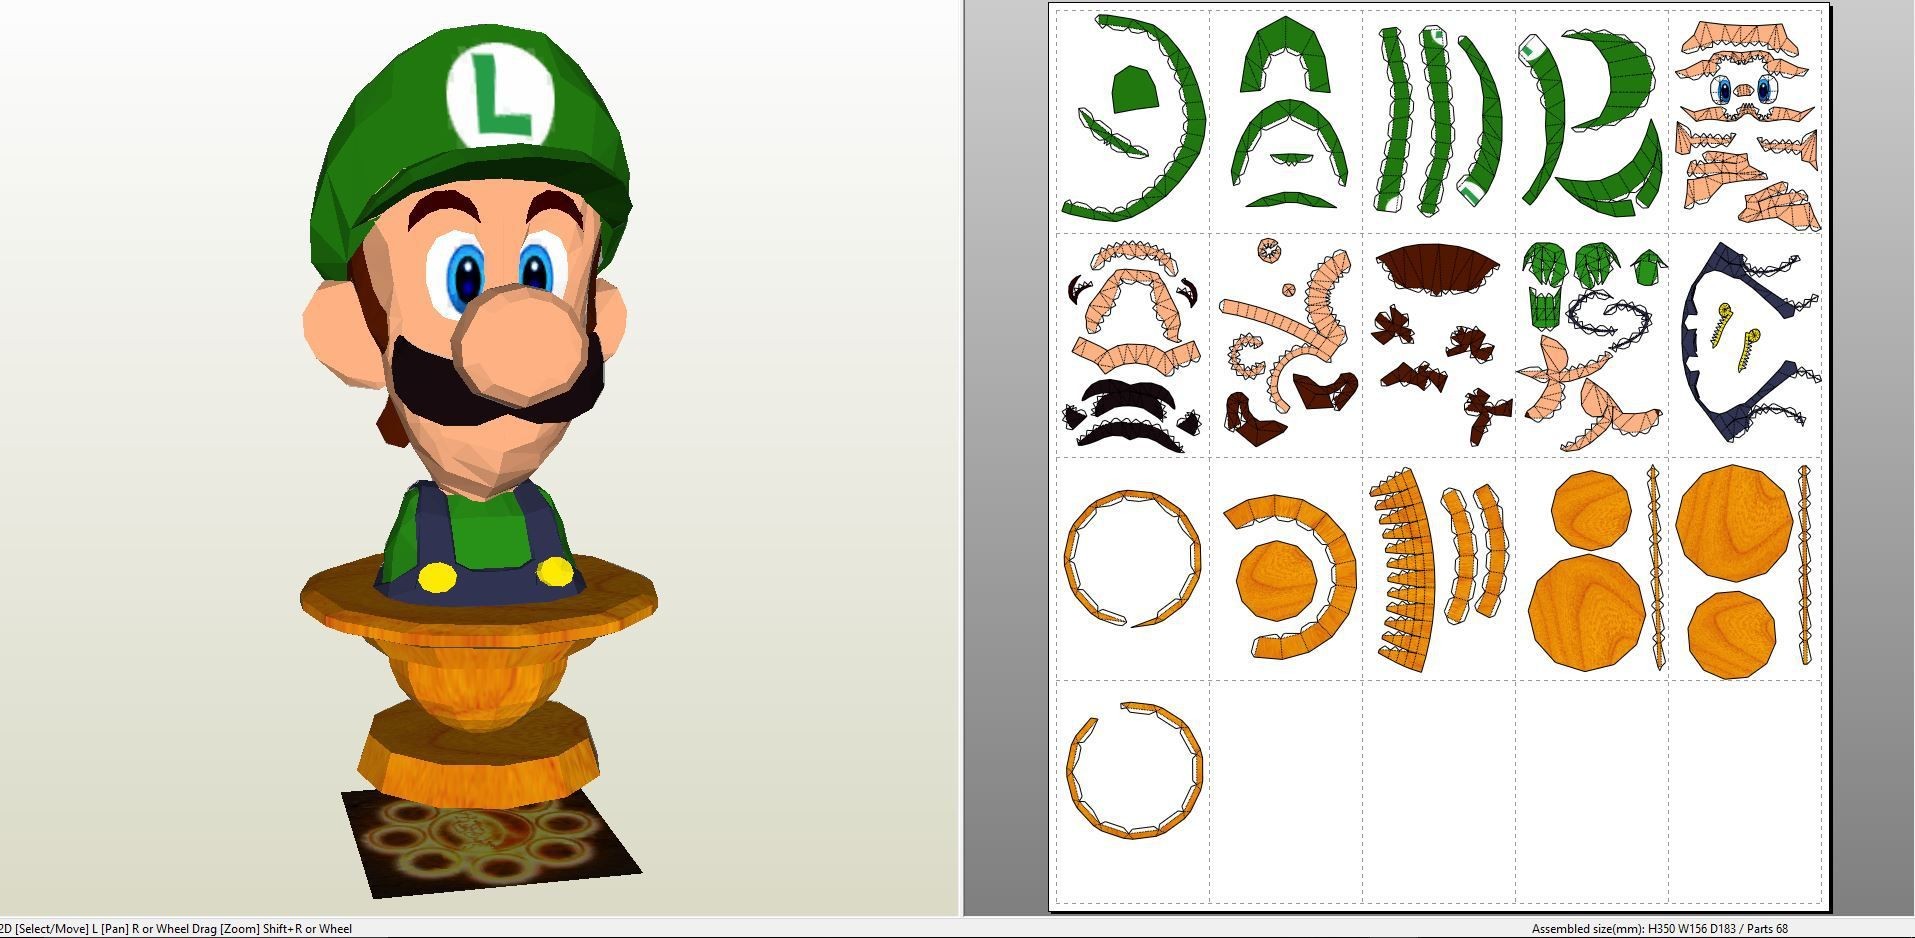 Super Mario Papercraft Papercraft Pdo File Template for Super Mario Captain toad Bust